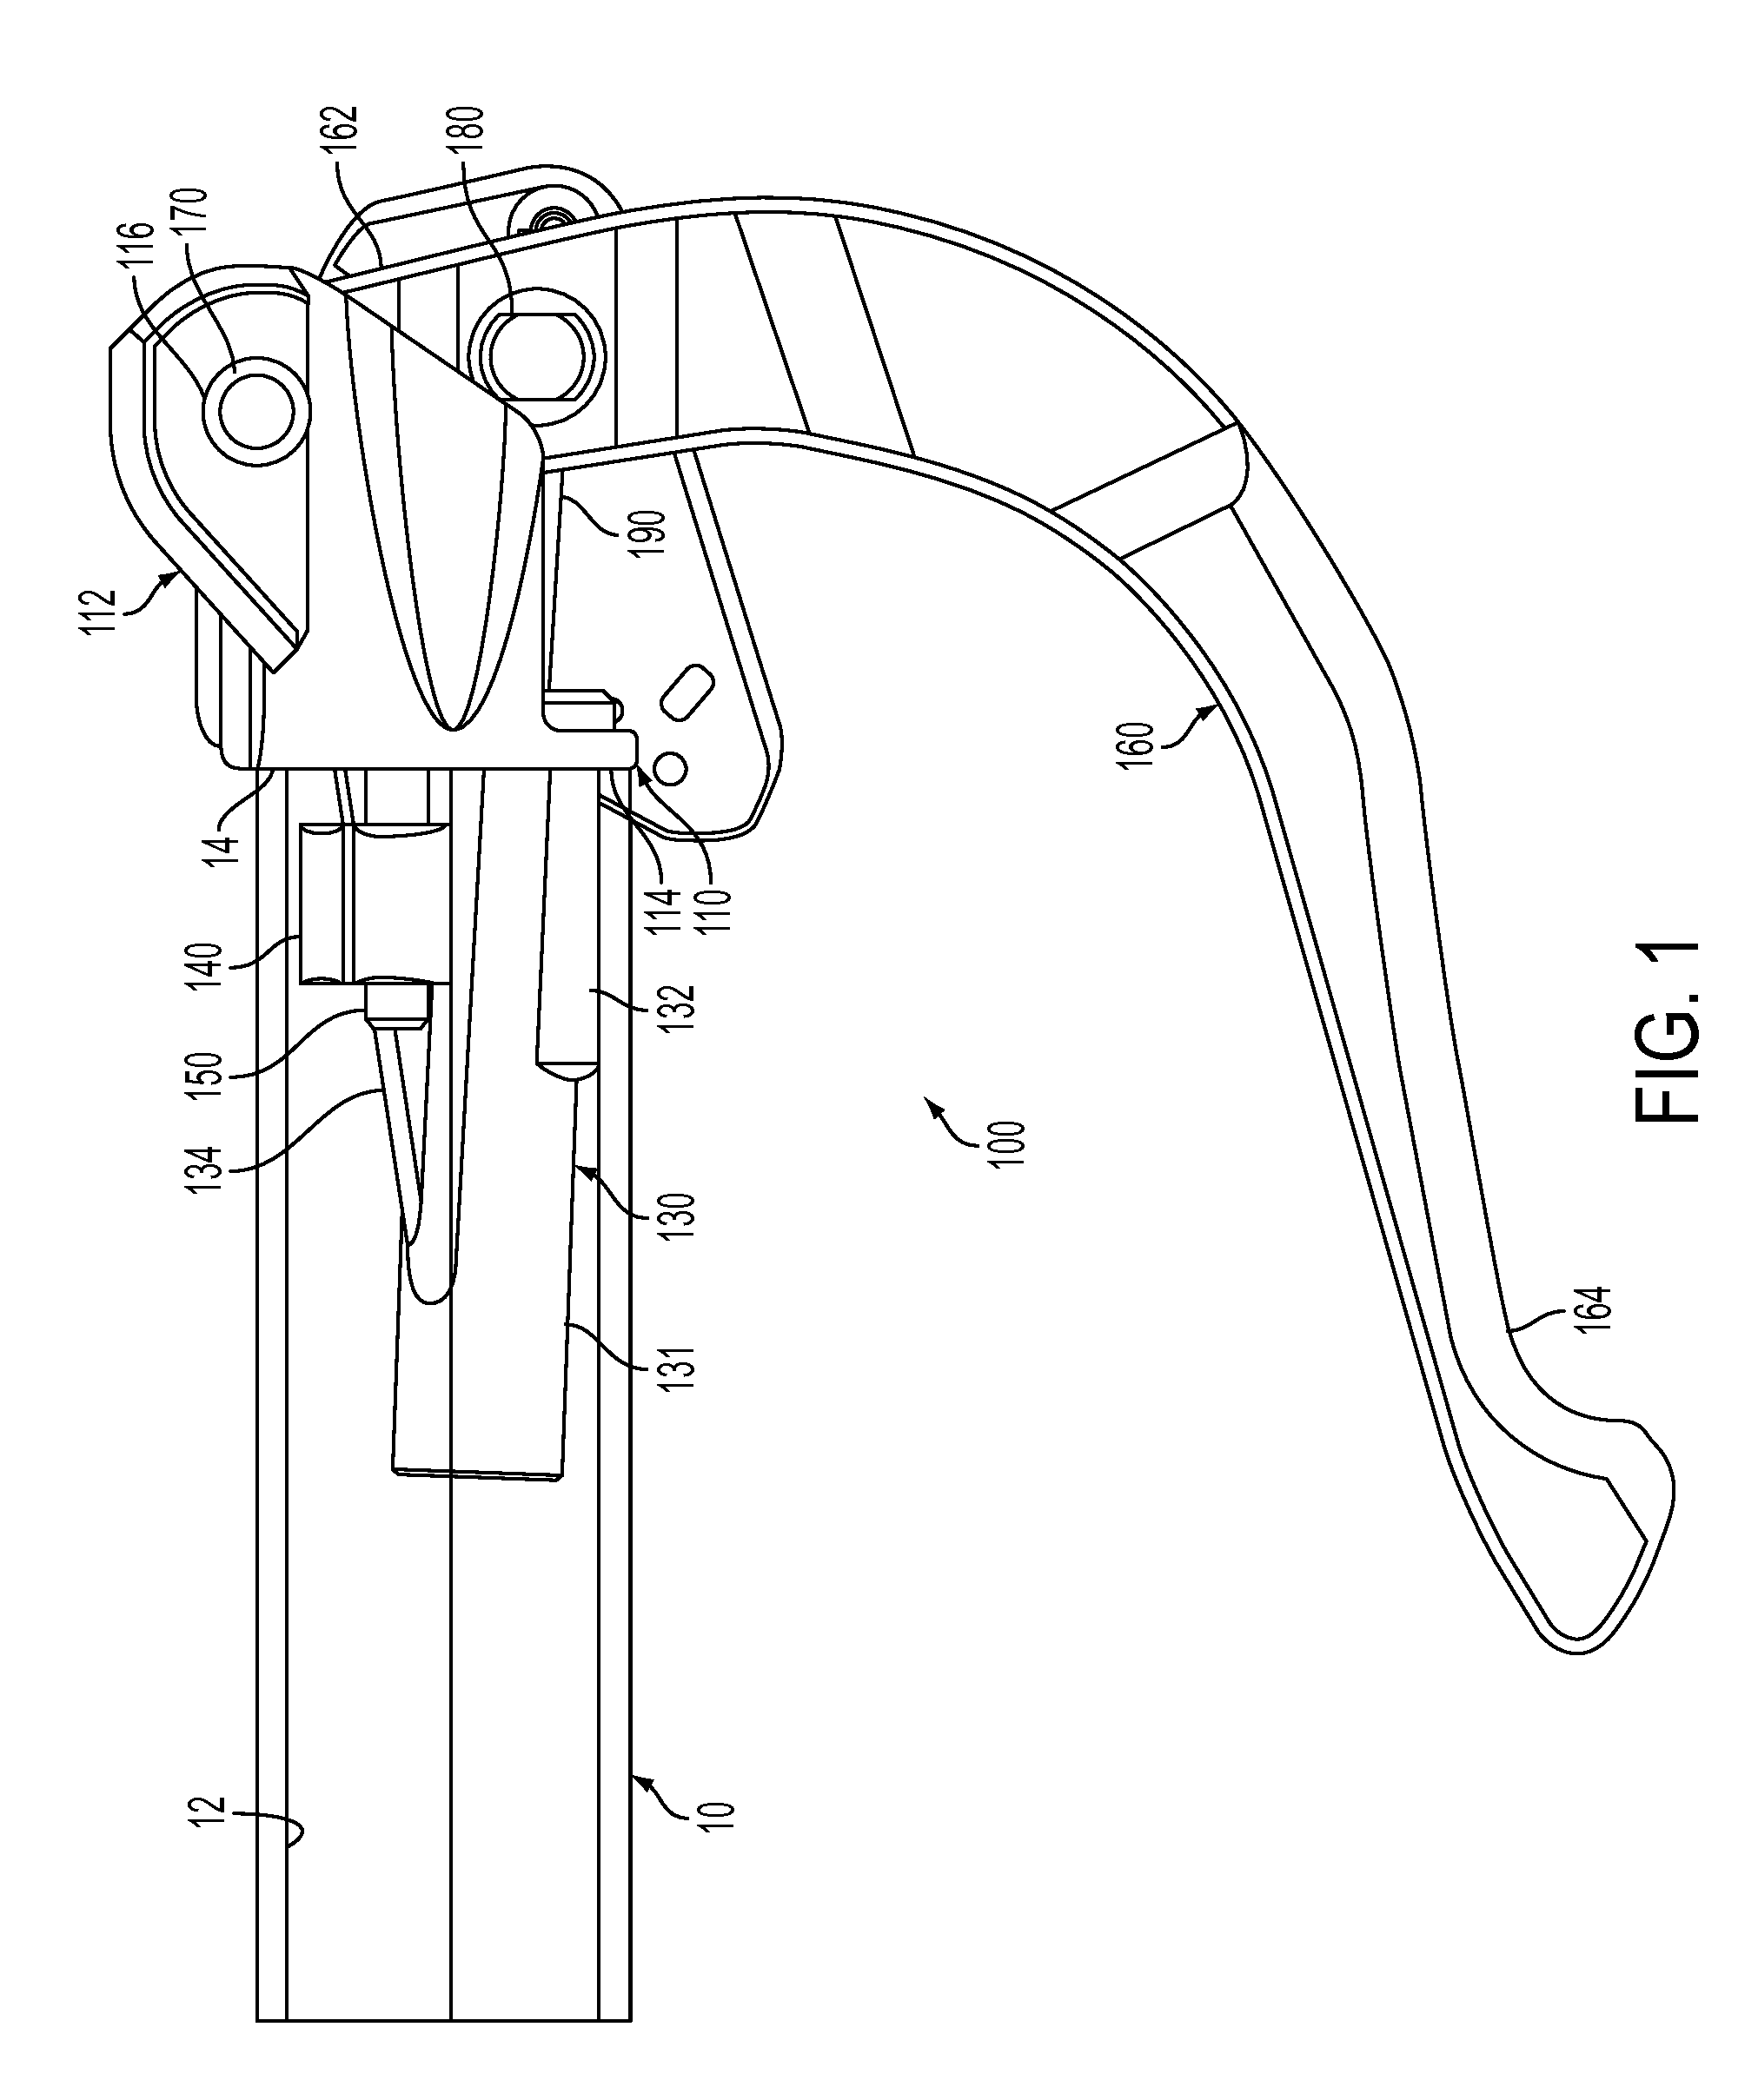 Brake control apparatus and control lever therefor